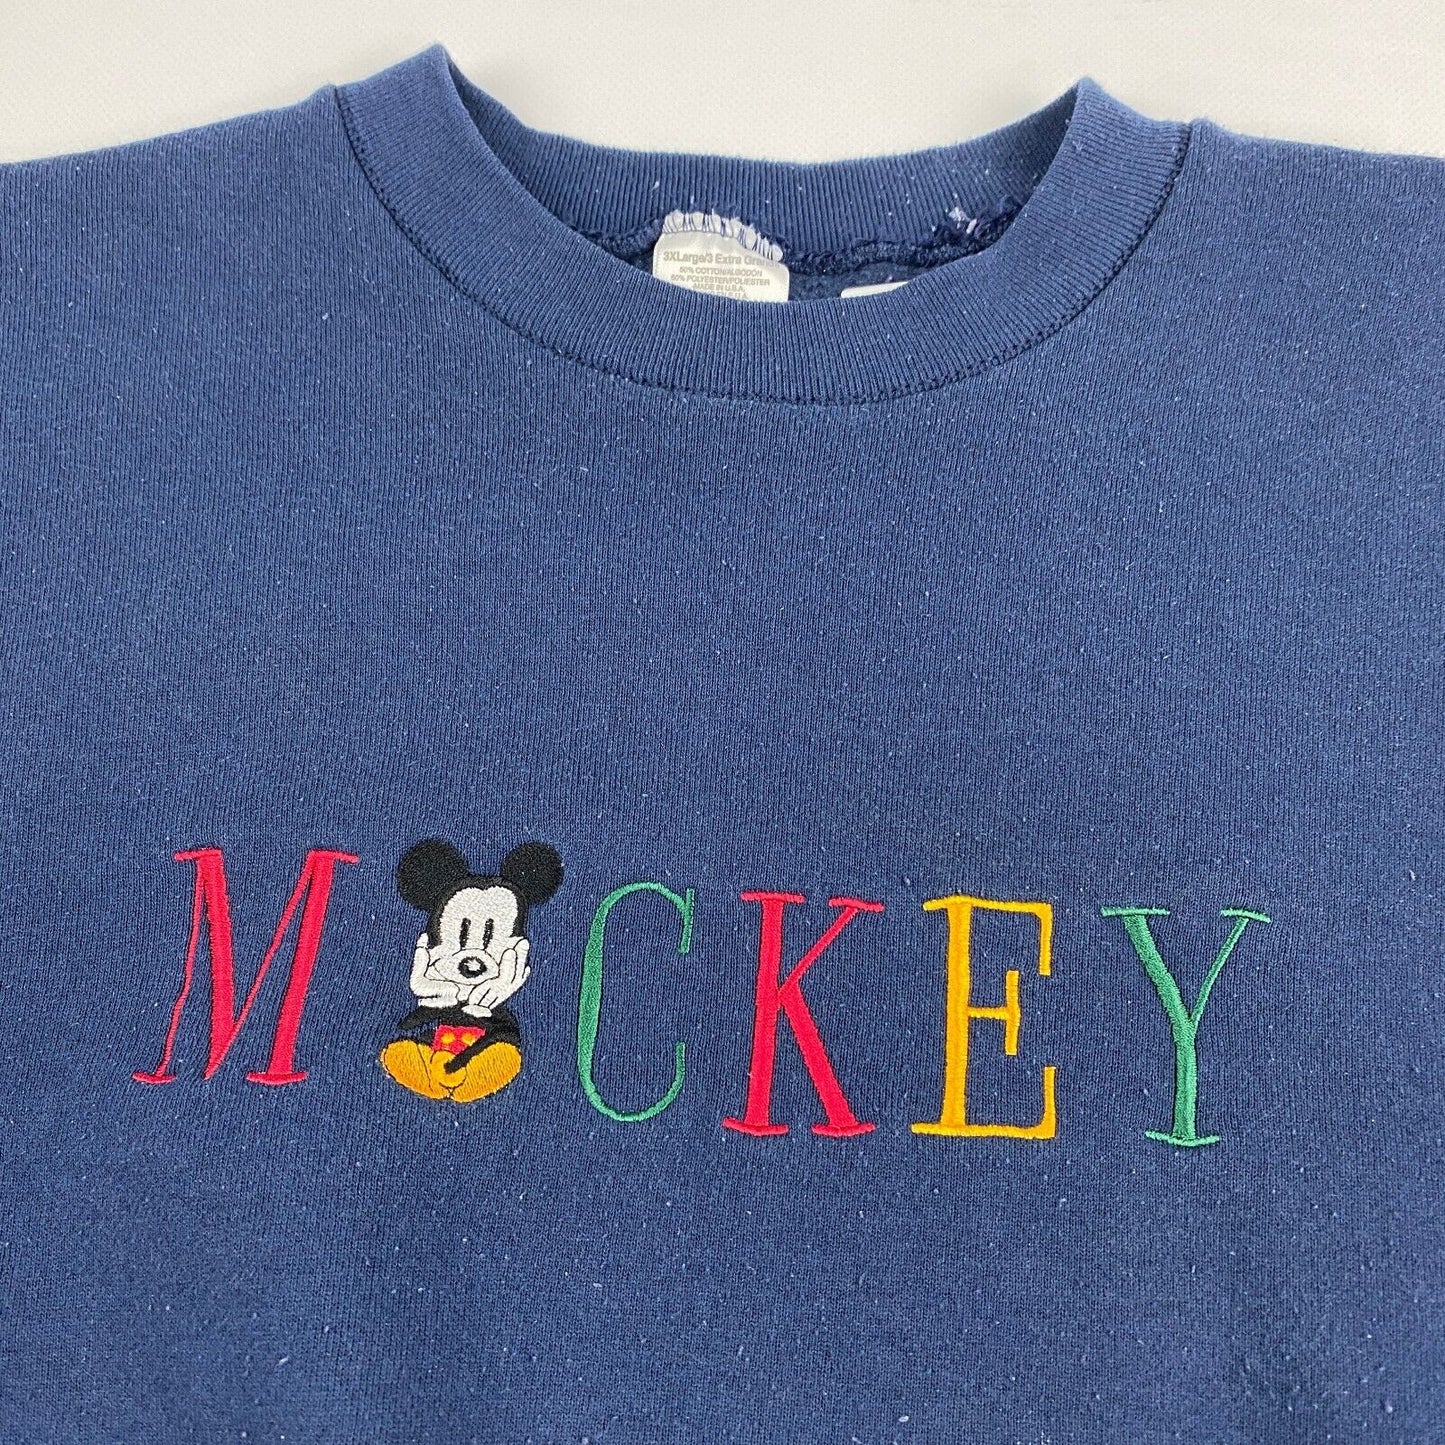 VINTAGE 90s Mickey Mouse Embroidered Navy Crewneck Sweater sz 3XL Mens